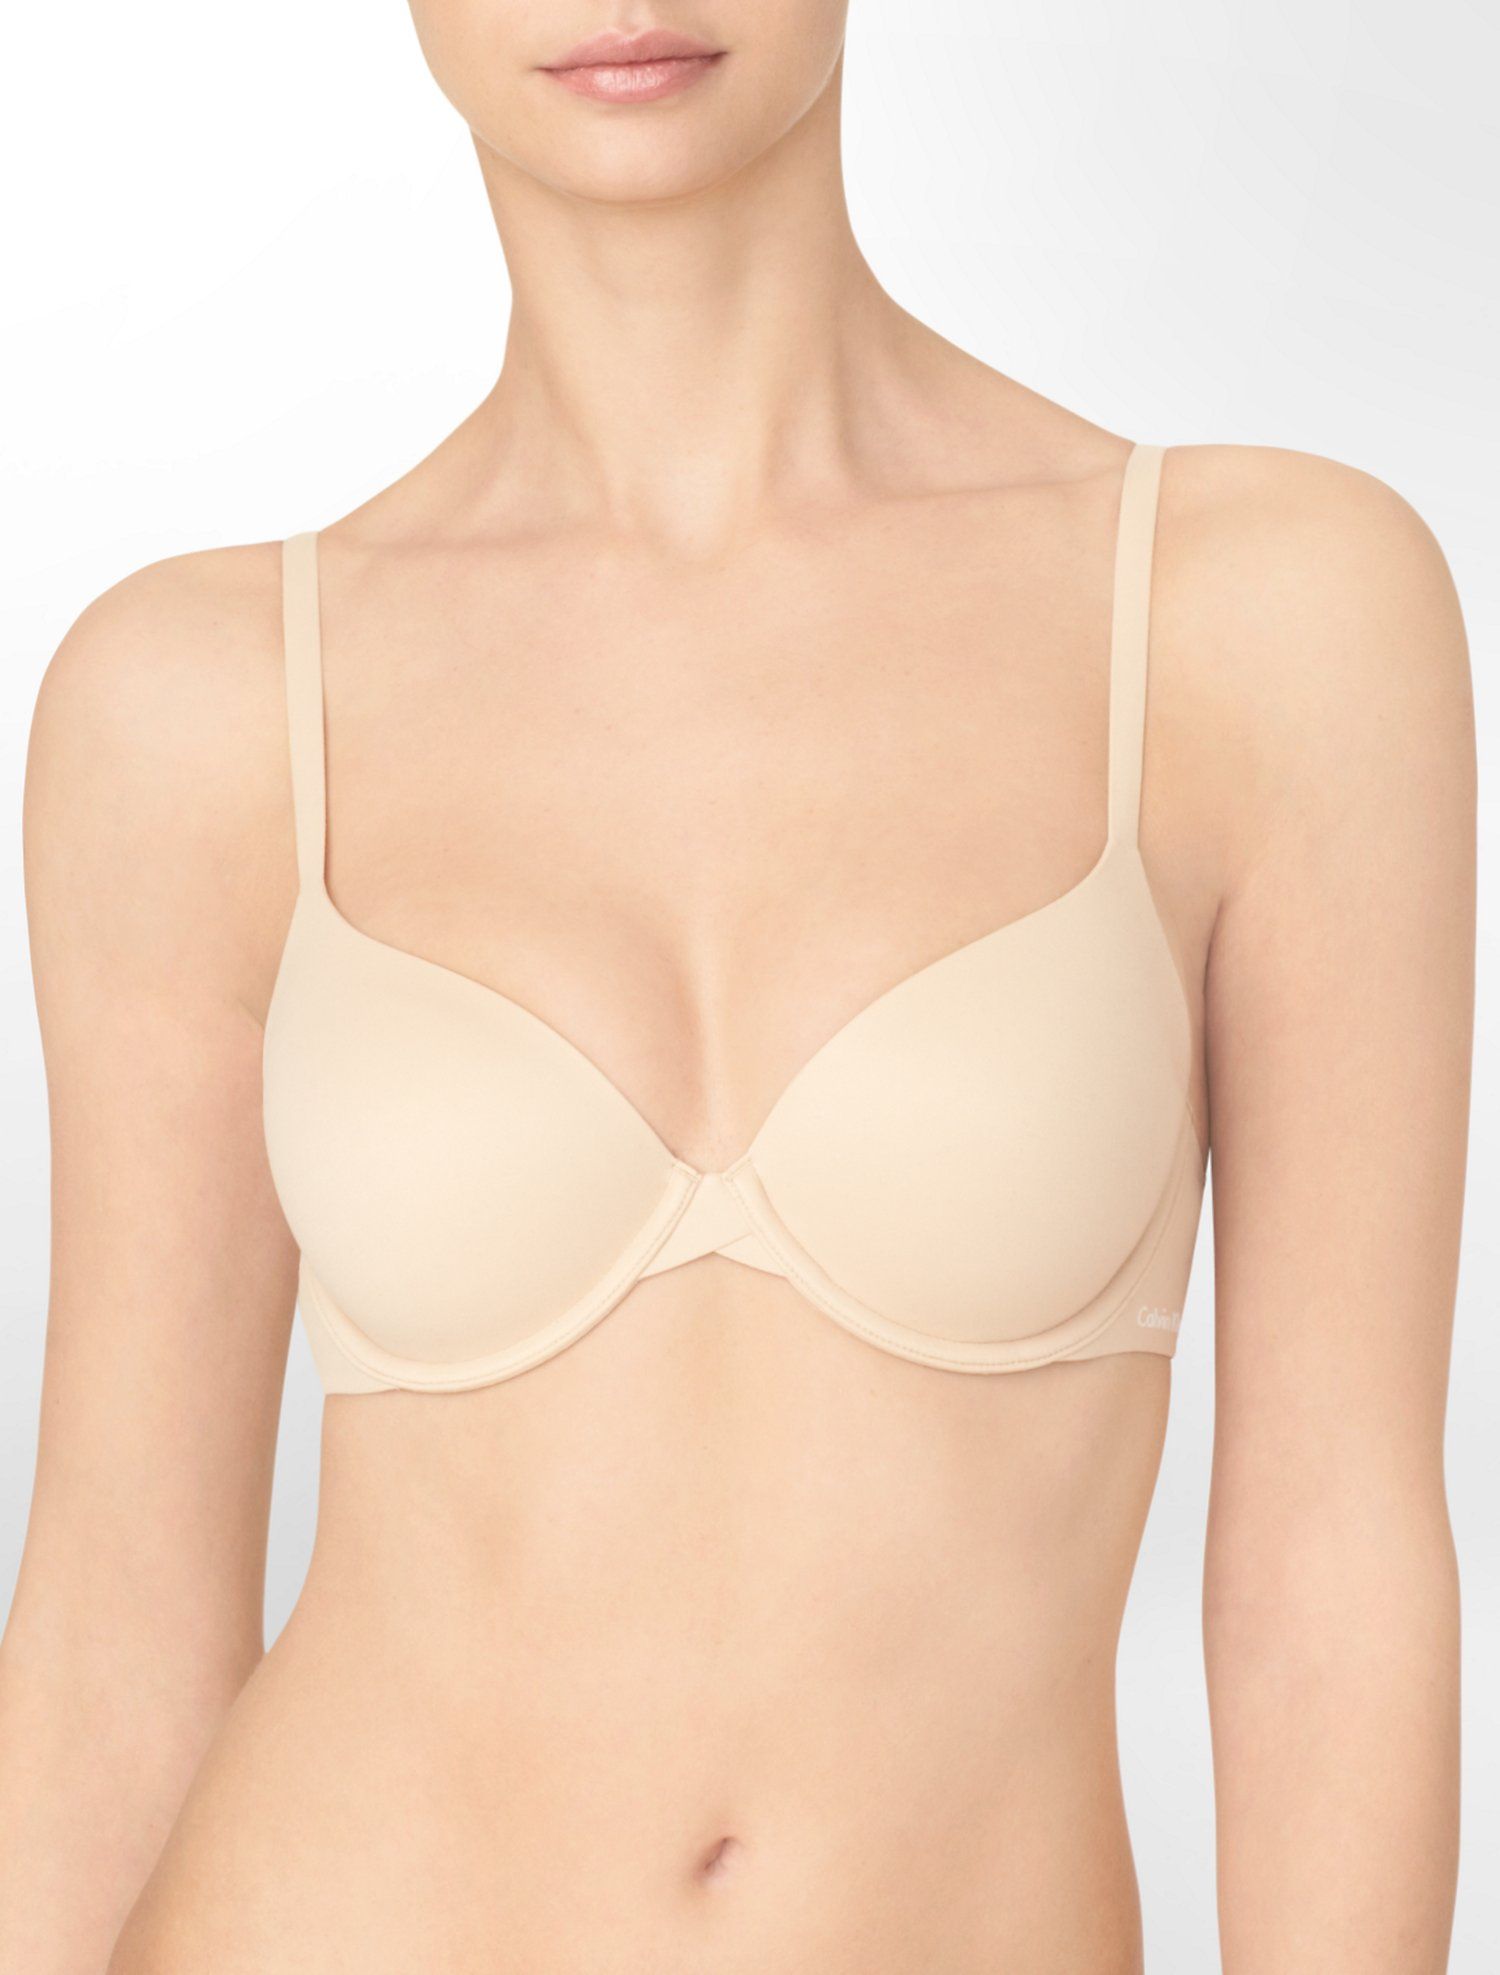 Calvin Klein Perfectly Fit Modern T-Shirt Bra Review, Price and Features -  Pros and Cons of Calvin Klein Perfectly Fit Modern T-Shirt Bra